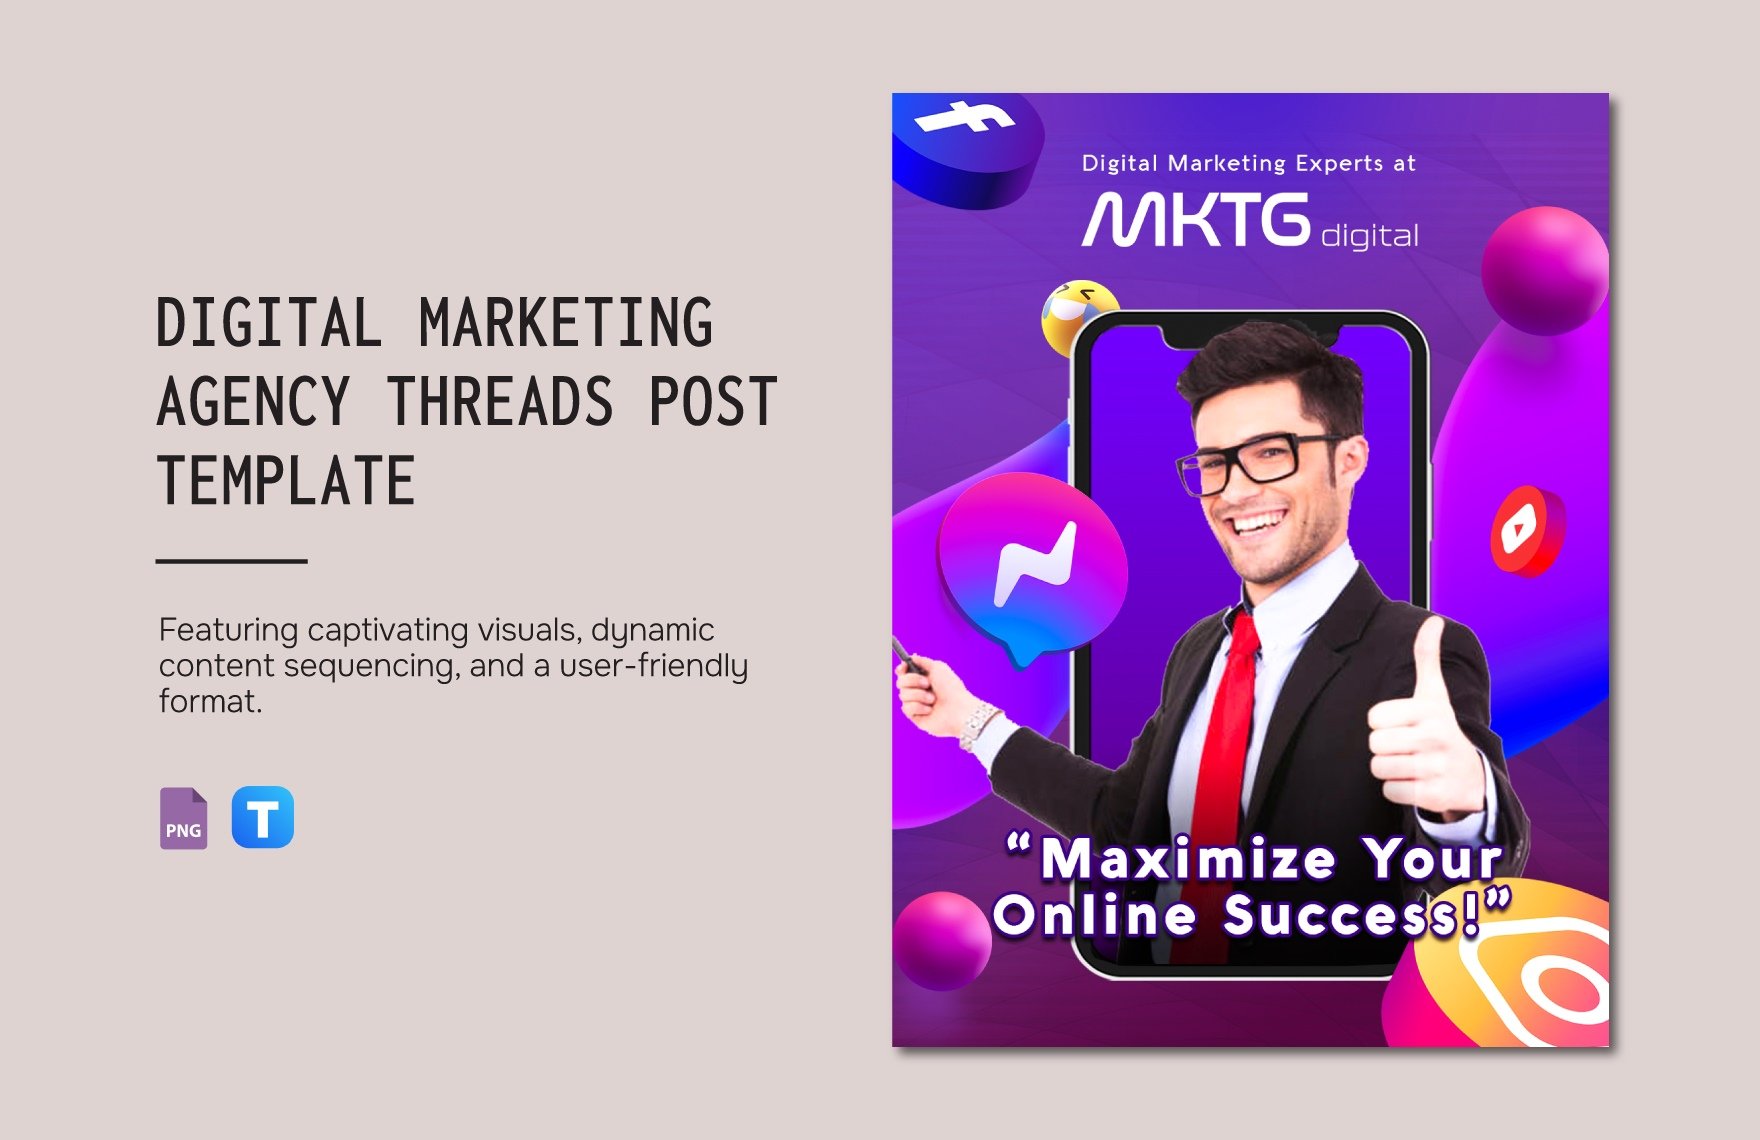 Digital Marketing Agency Threads Post Template in PNG